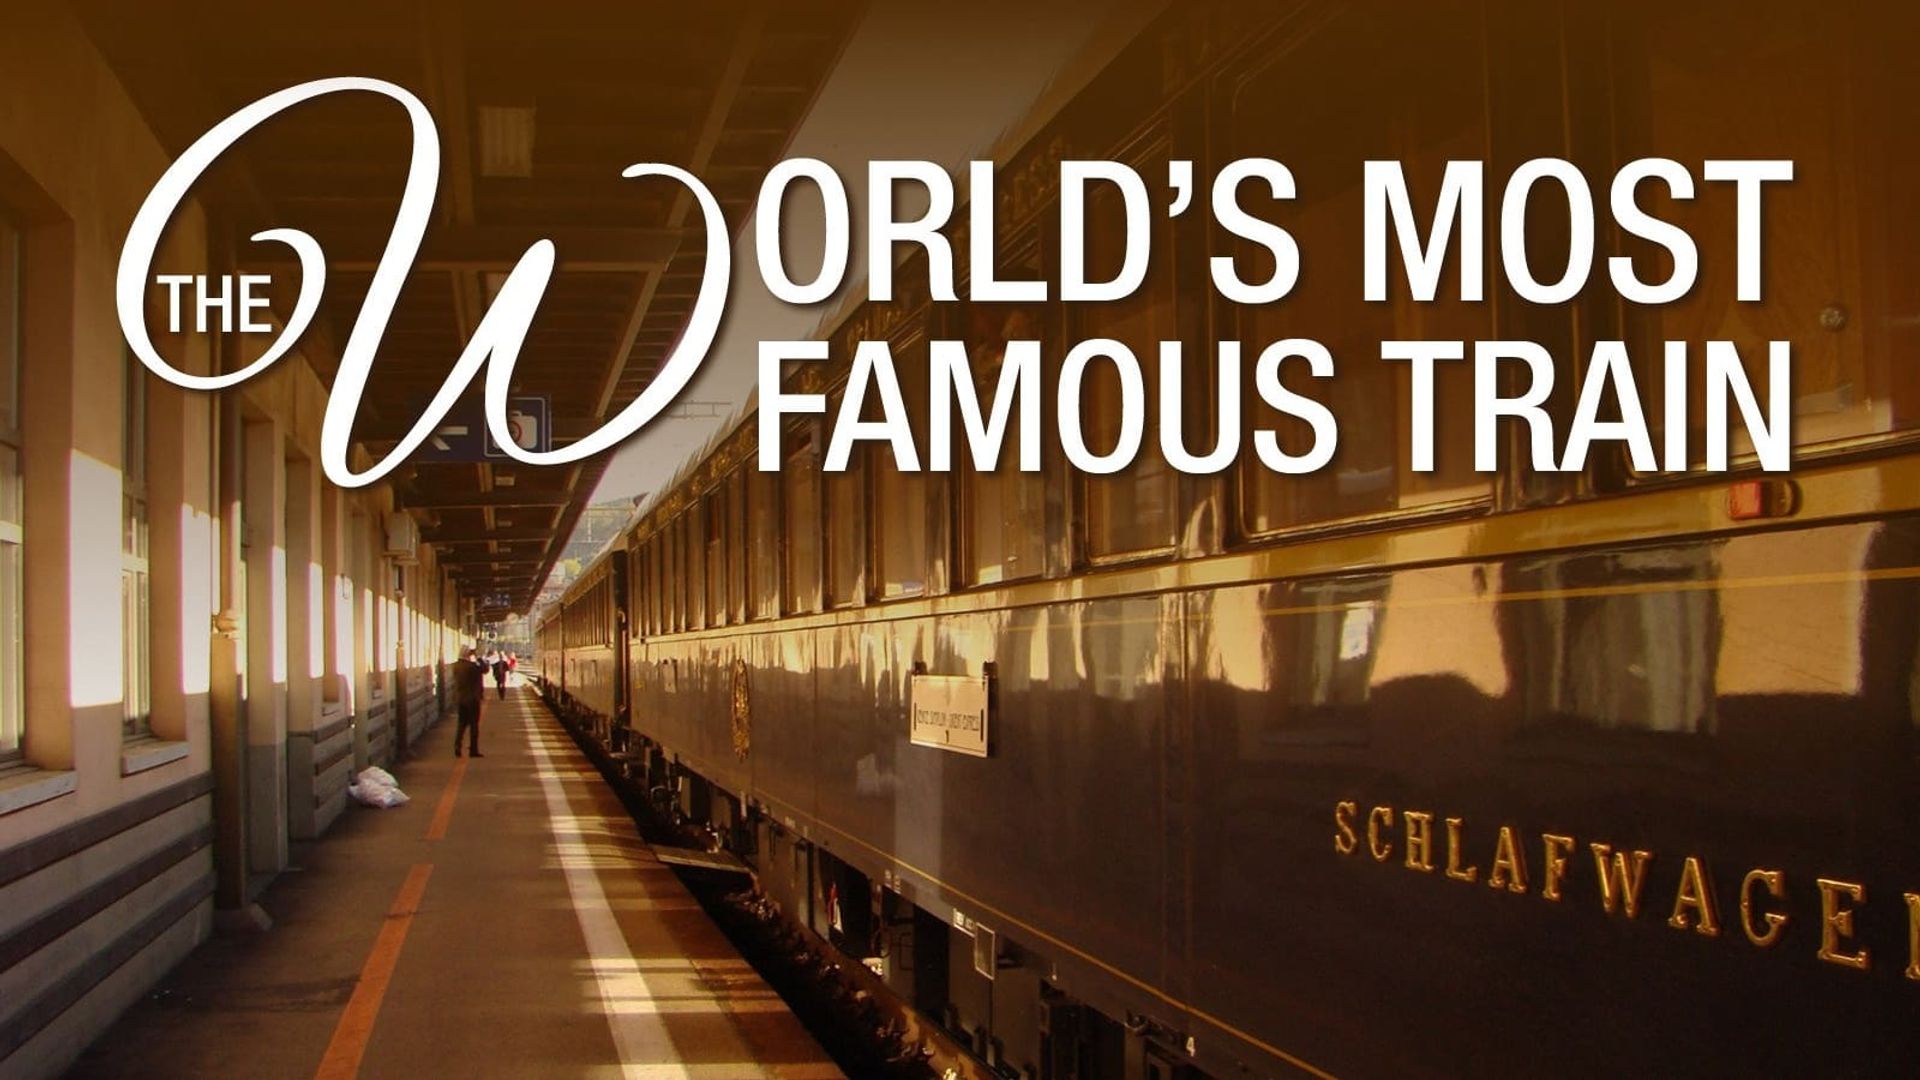 The Worlds Most Famous Train background